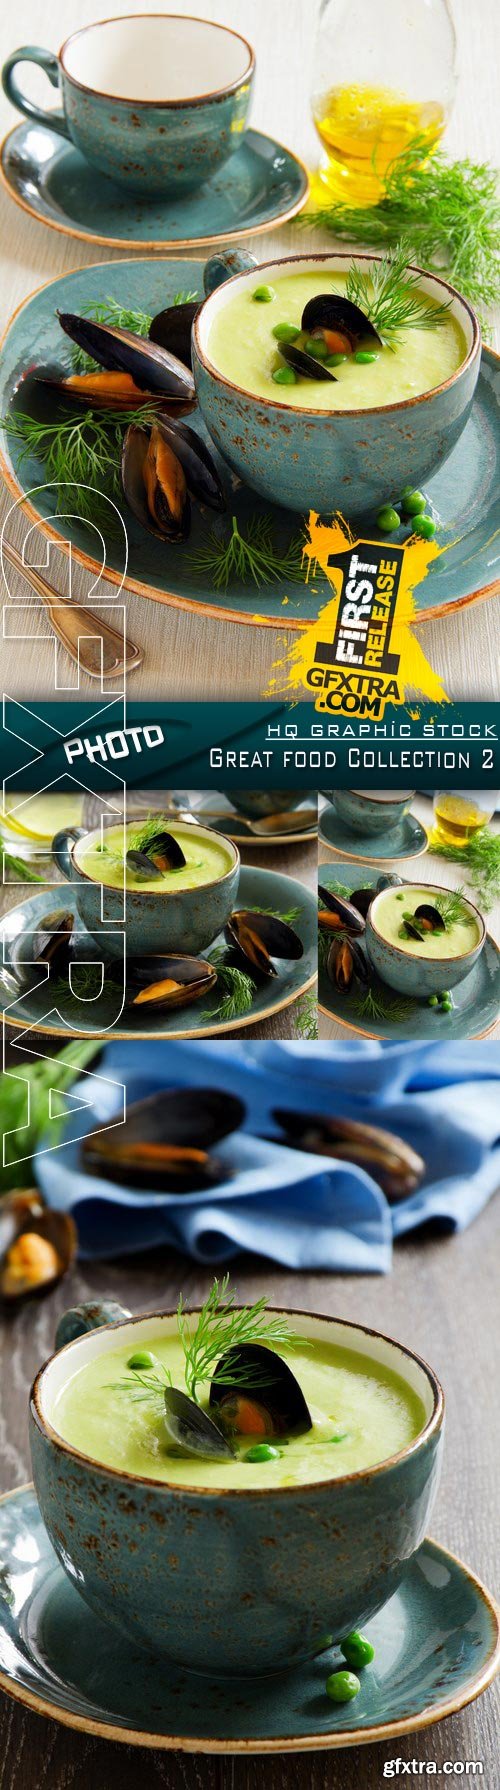 Stock Photo - Great food Collection 2